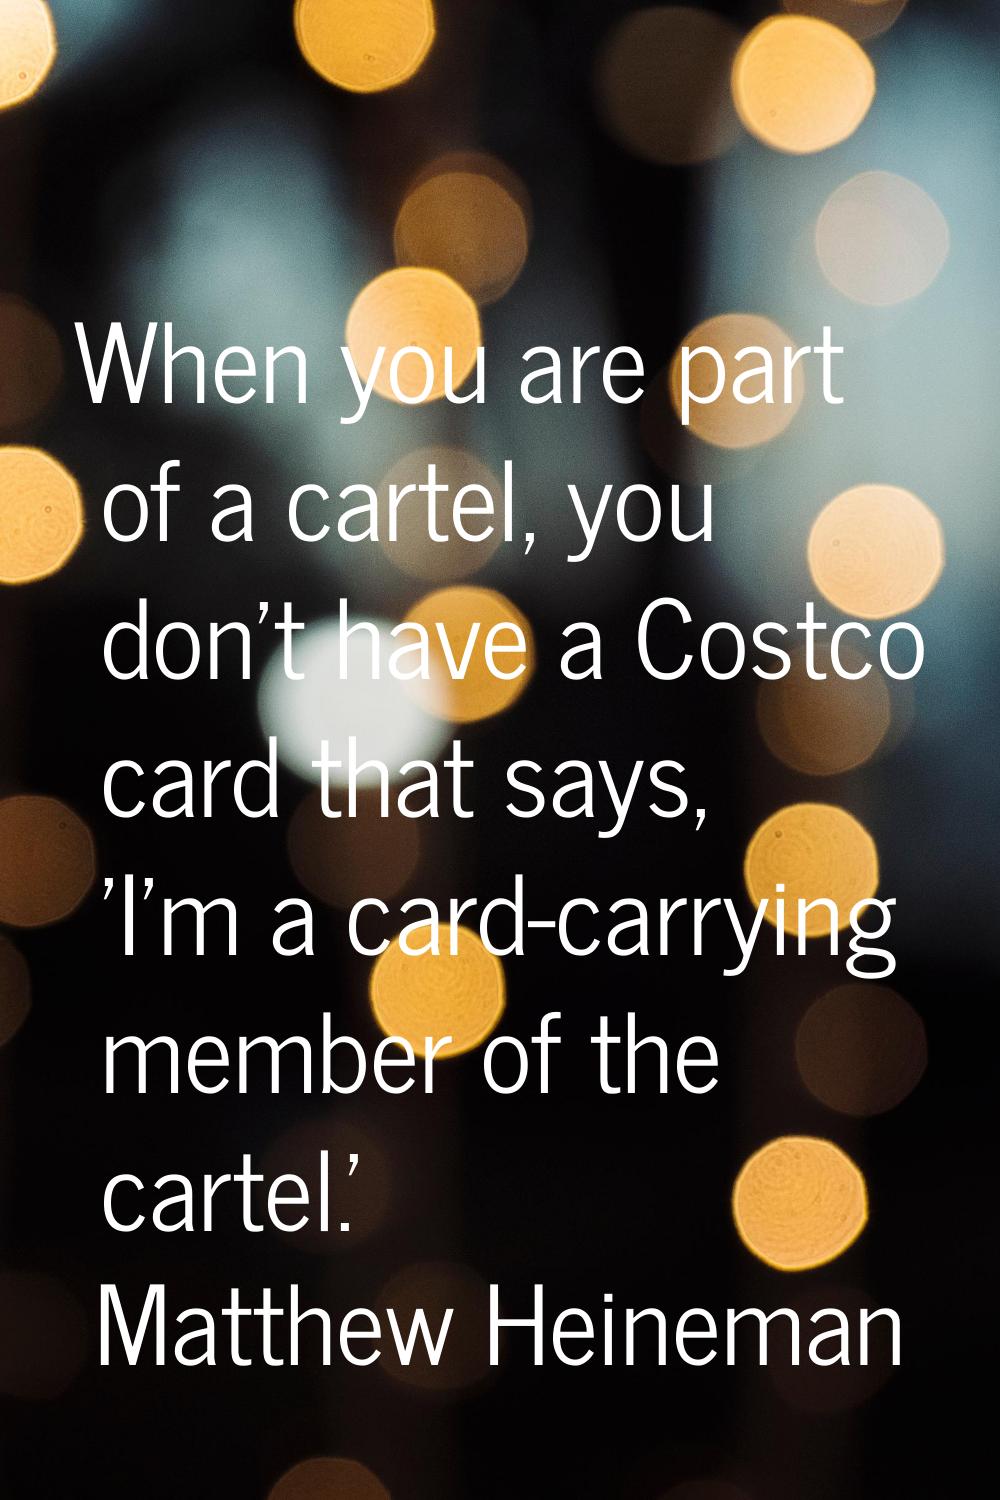 When you are part of a cartel, you don't have a Costco card that says, 'I'm a card-carrying member 